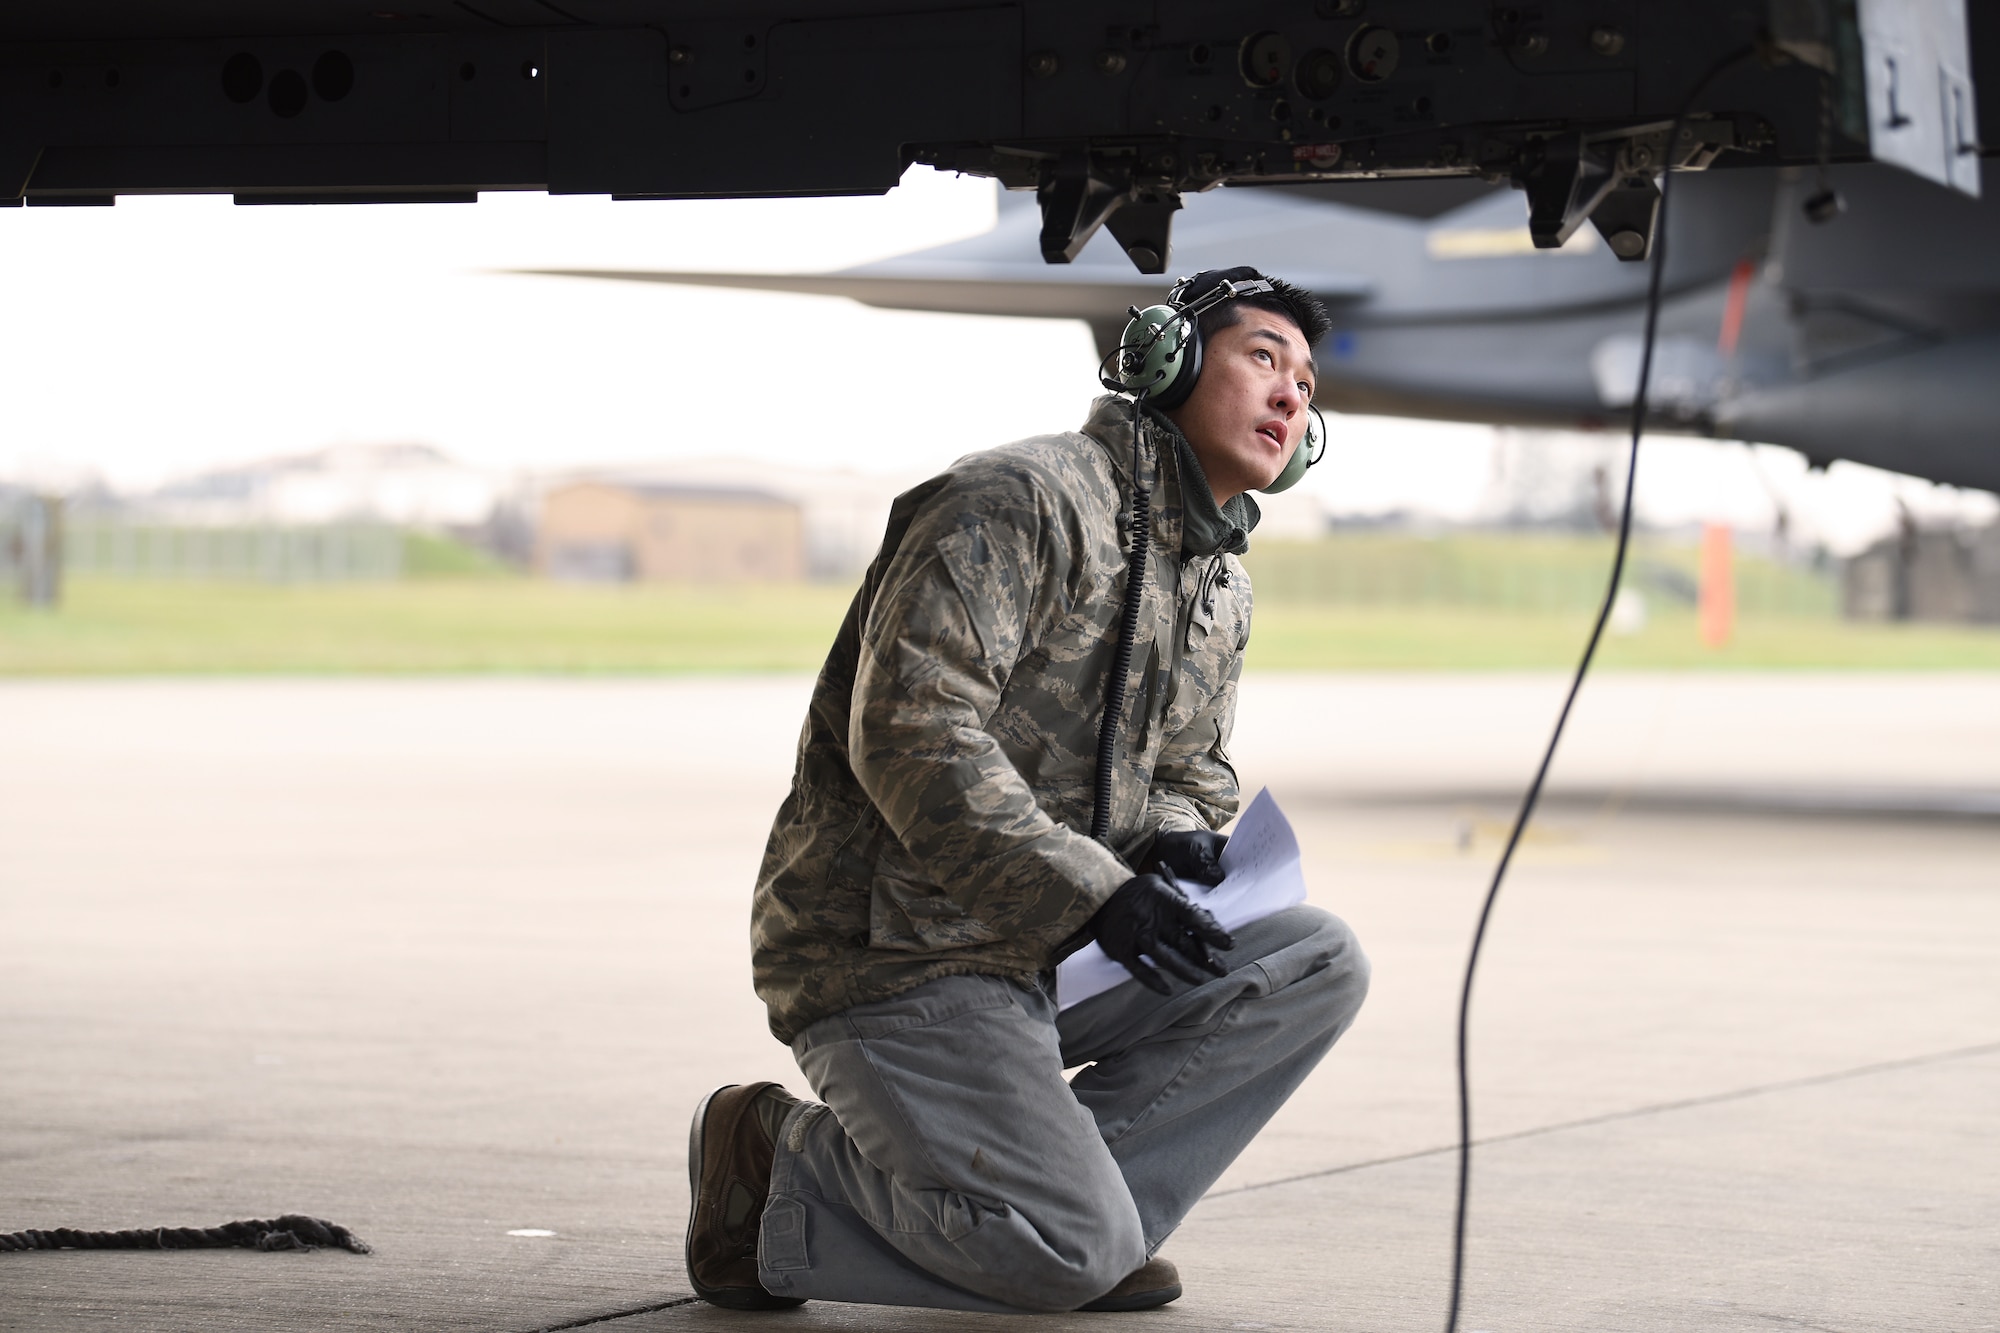 A 492nd Aircraft Maintenance Unit Airman conducts an operations functional check on an F-15E Strike Eagle at Royal Air Force Lakenheath, England, Jan. 7, 2019. The aircraft maintainers conduct frequent functional checks to keep the multi-million dollar aircraft is tip-top shape. (U.S. Air Force photo by Airman 1st Class Shanice Williams-Jones)